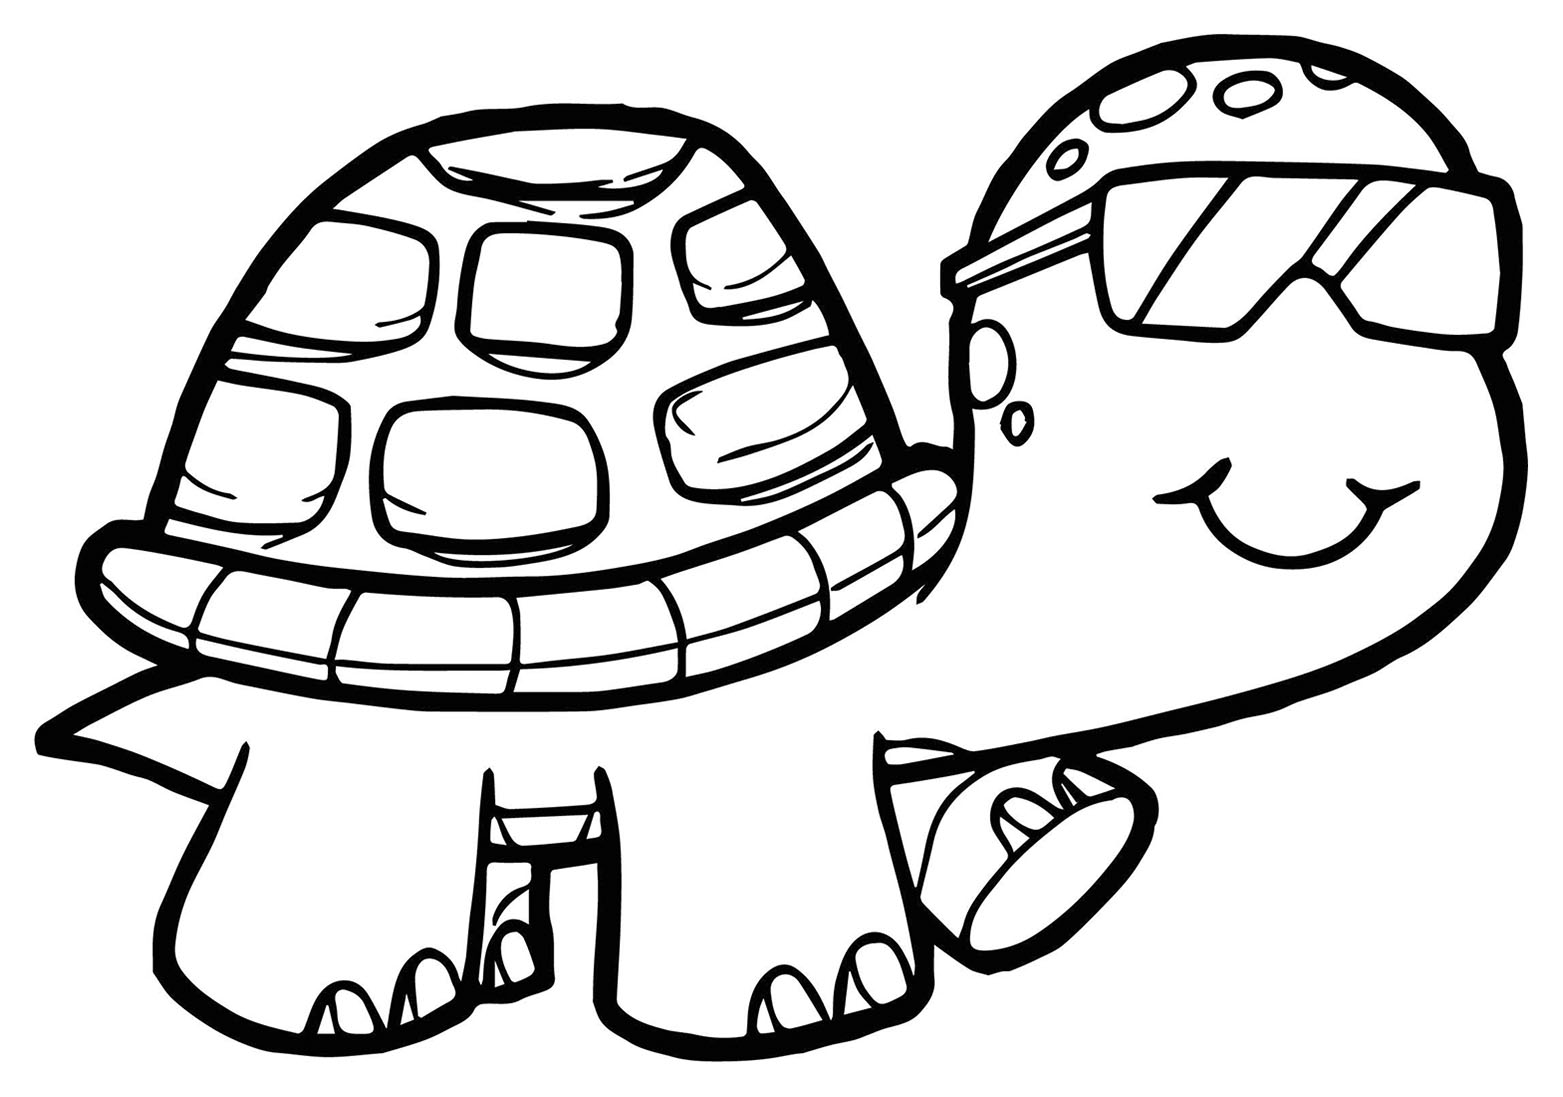 Fun turtle coloring pages to print and color